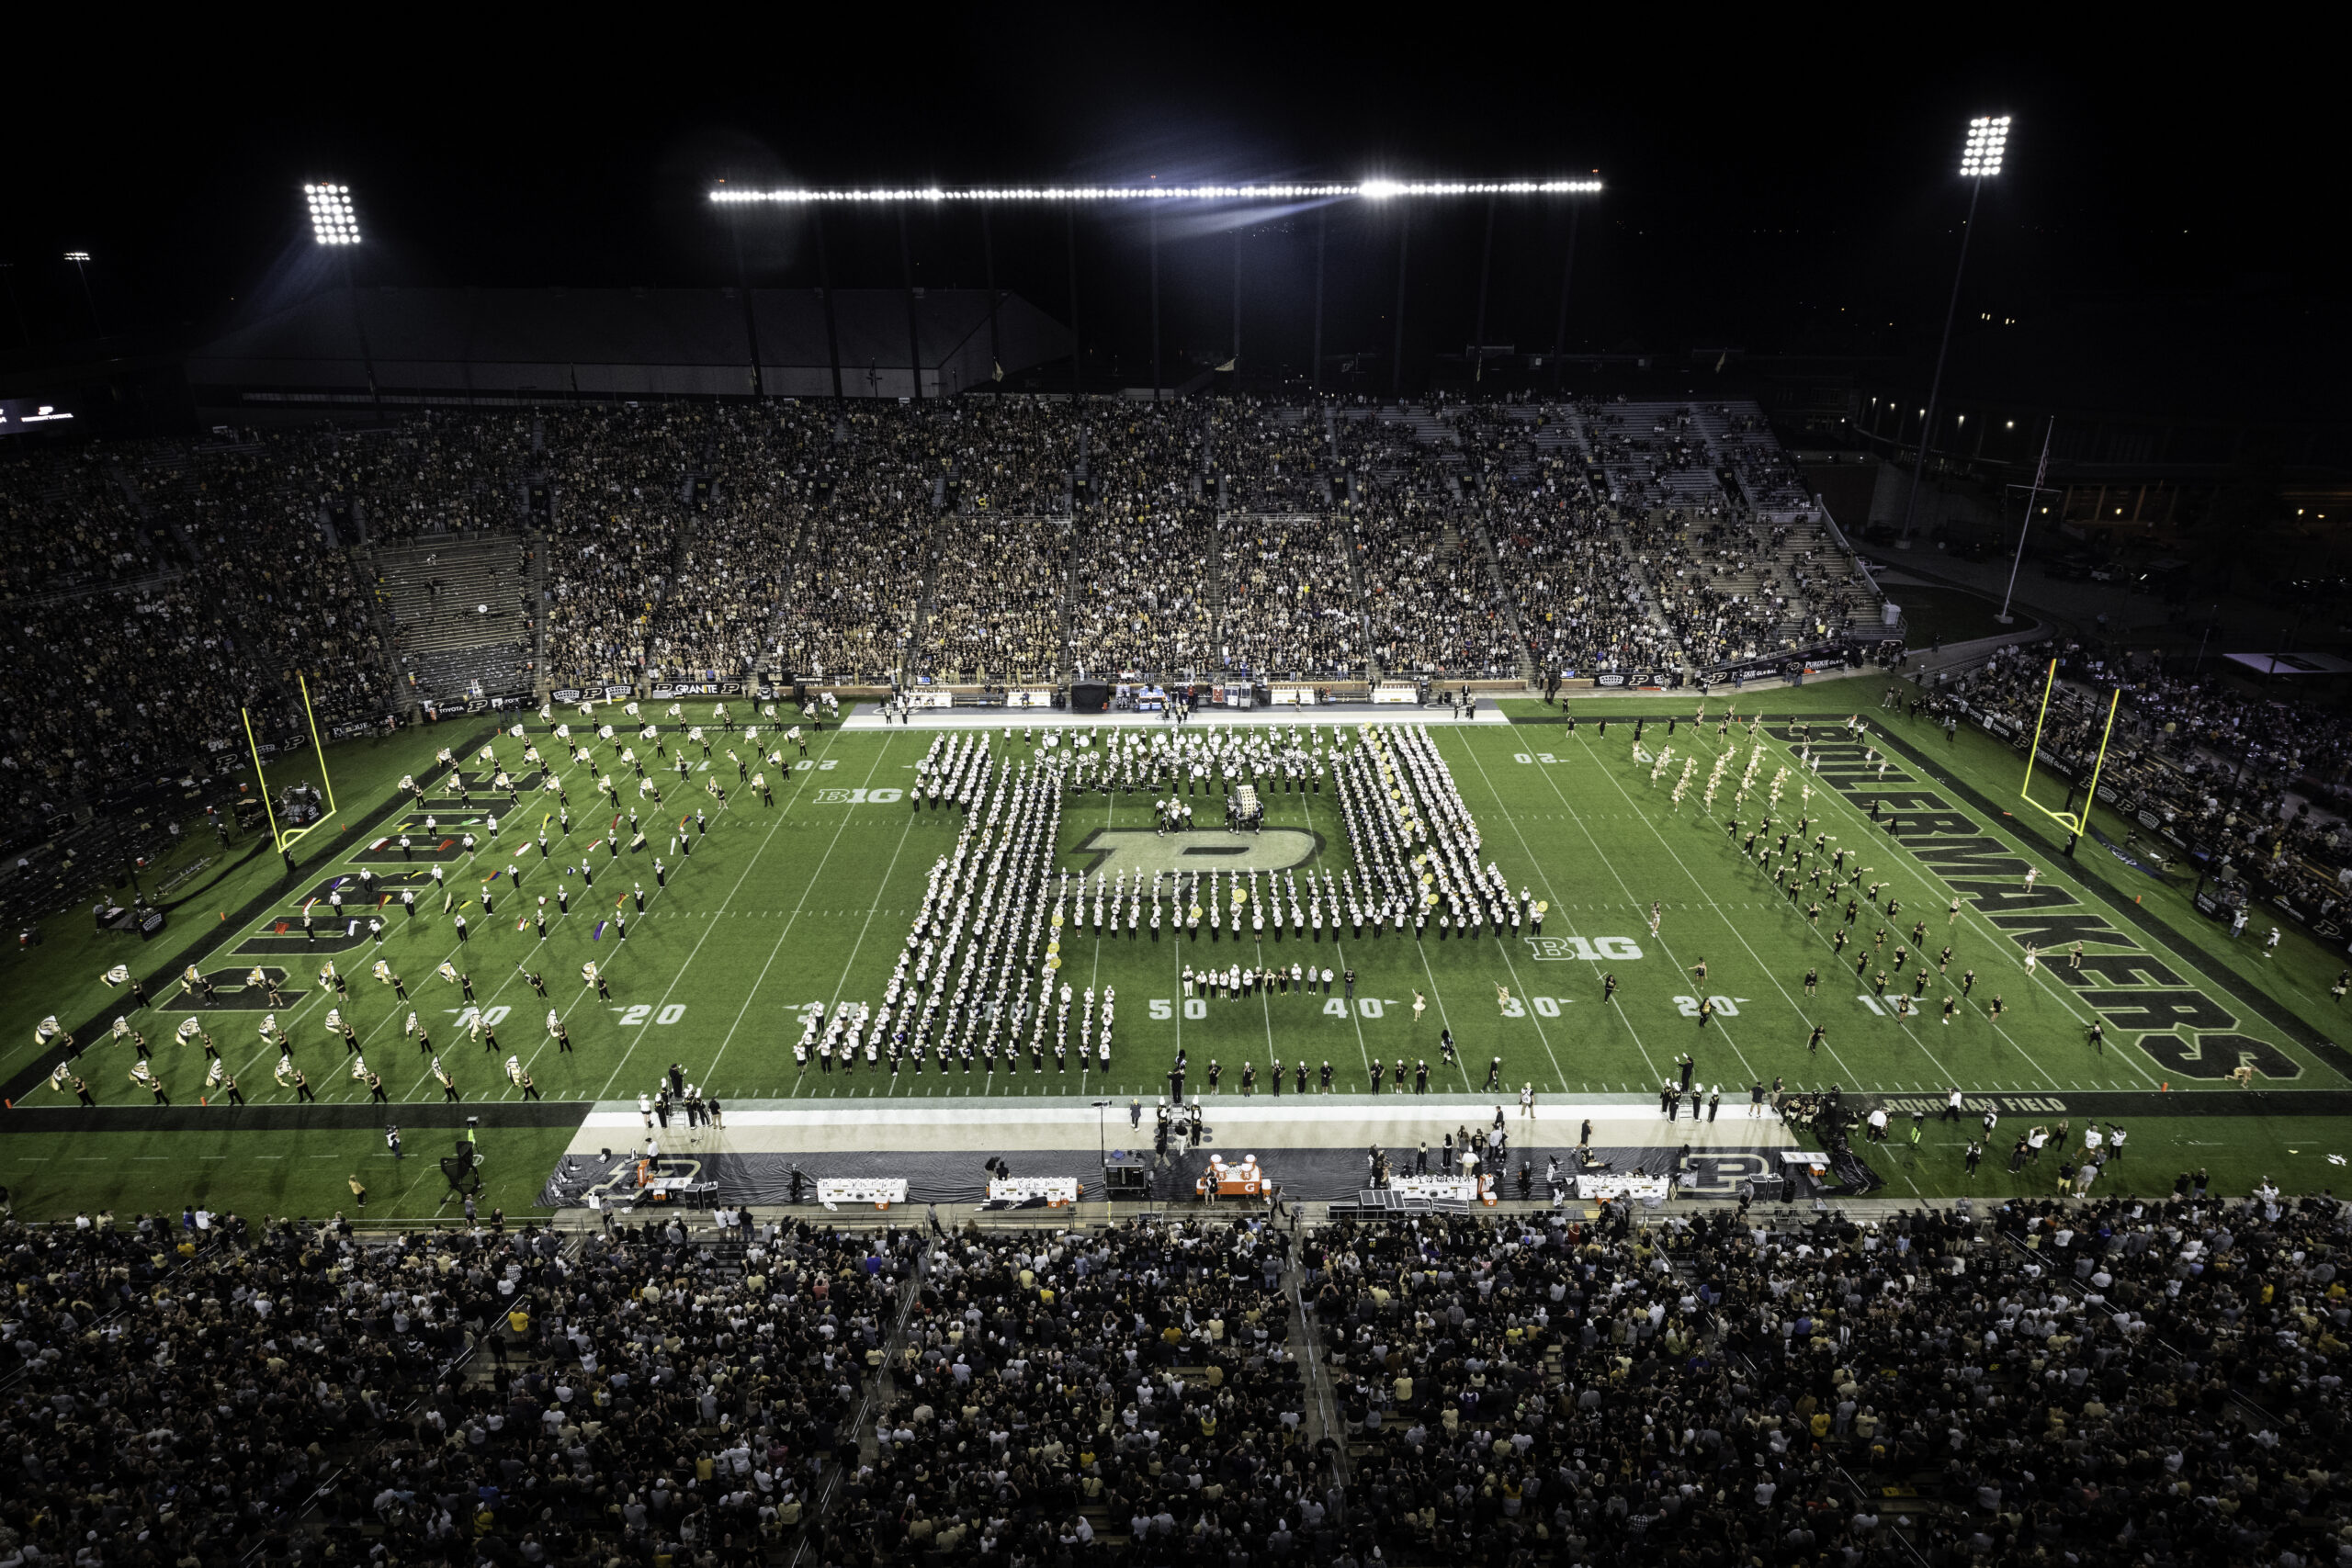 Purdue Band on Field at football game